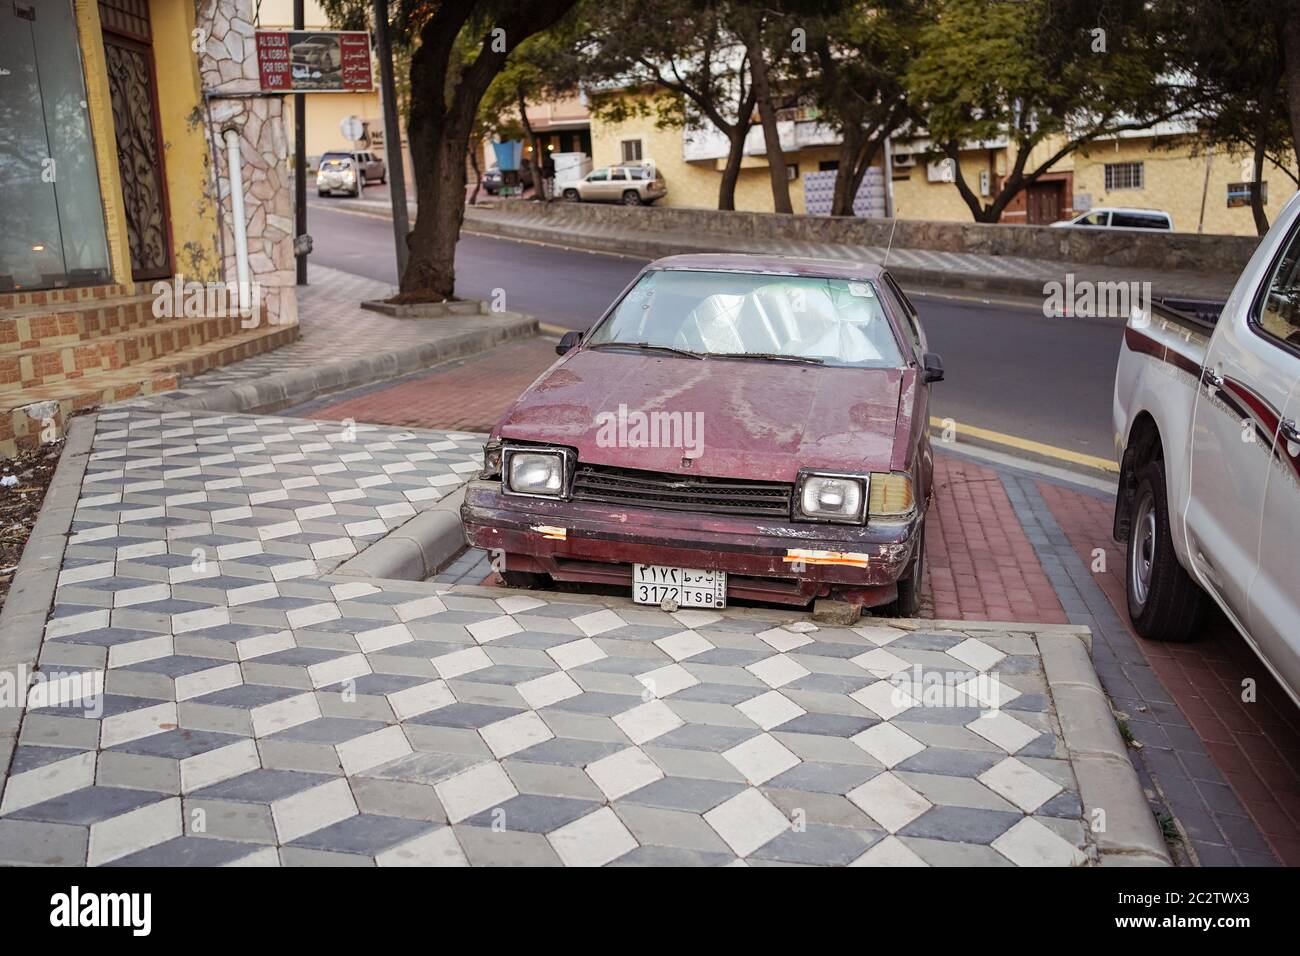 Abha / Saudi Arabia - January 23, 2020: old and rusty red car parked on the street Stock Photo